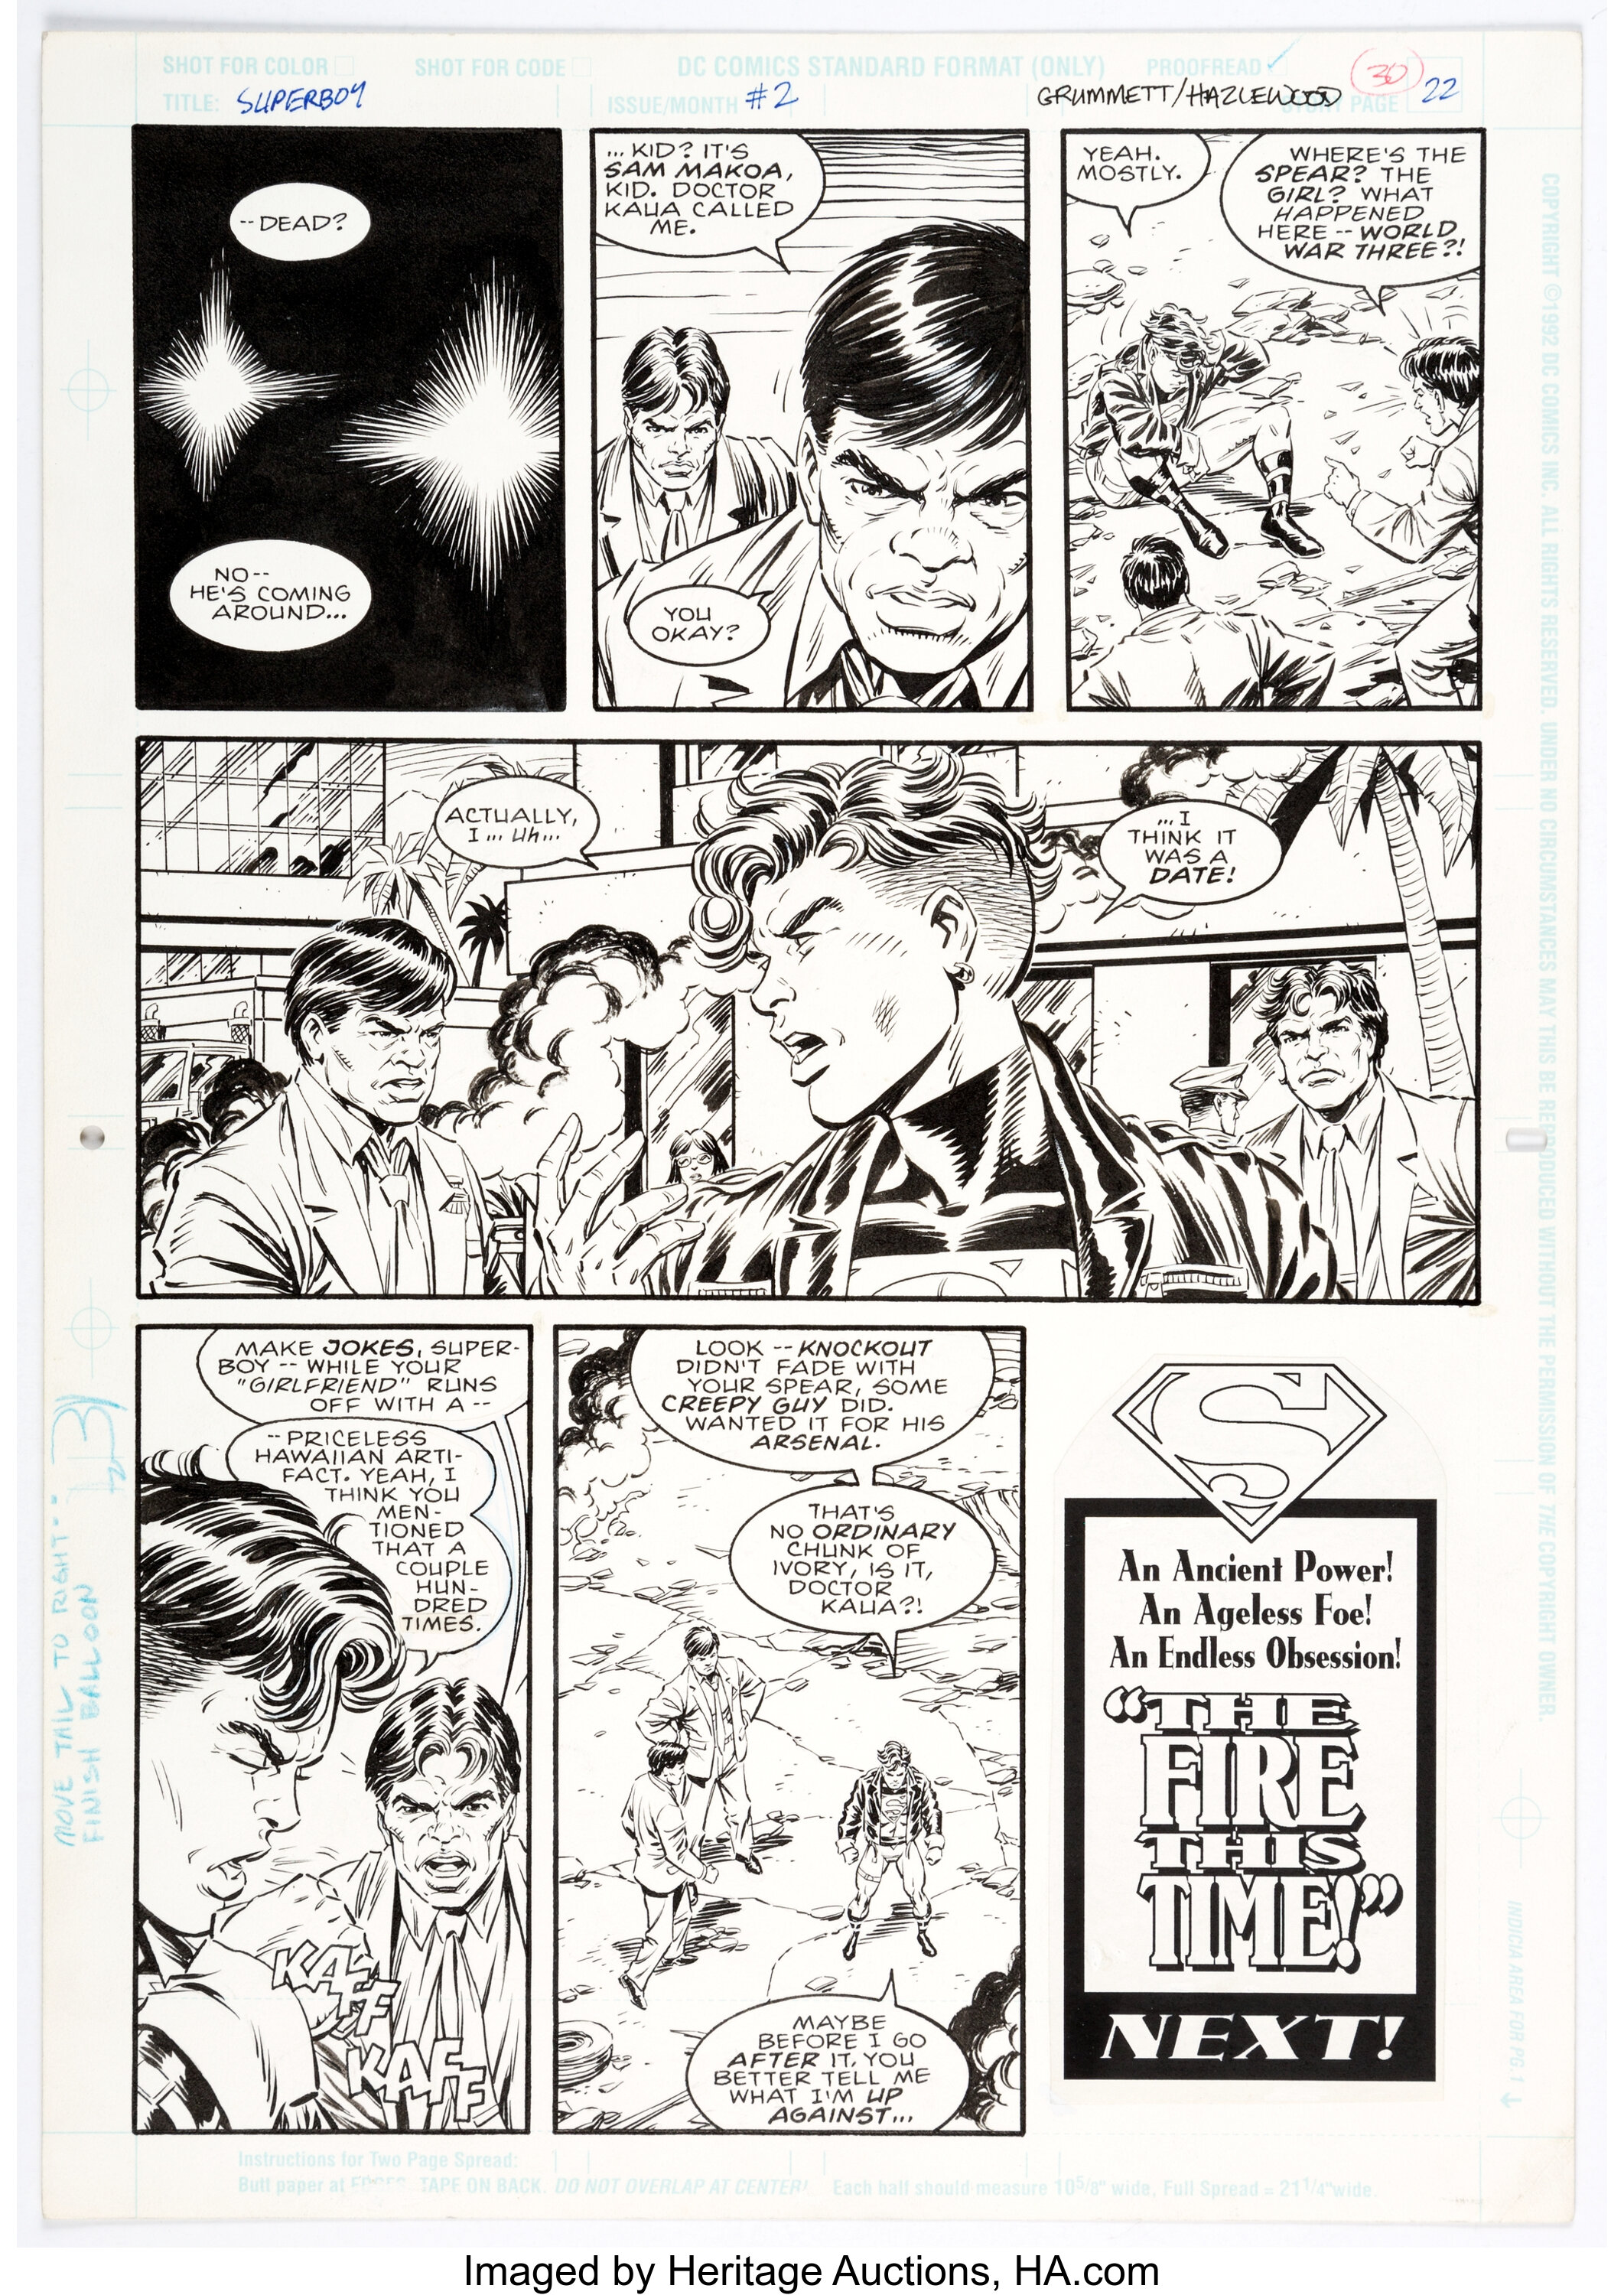 Tom Grummett And Doug Hazlewood Superboy 2 And 3 Story Pages Lot 15556 Heritage Auctions 9699